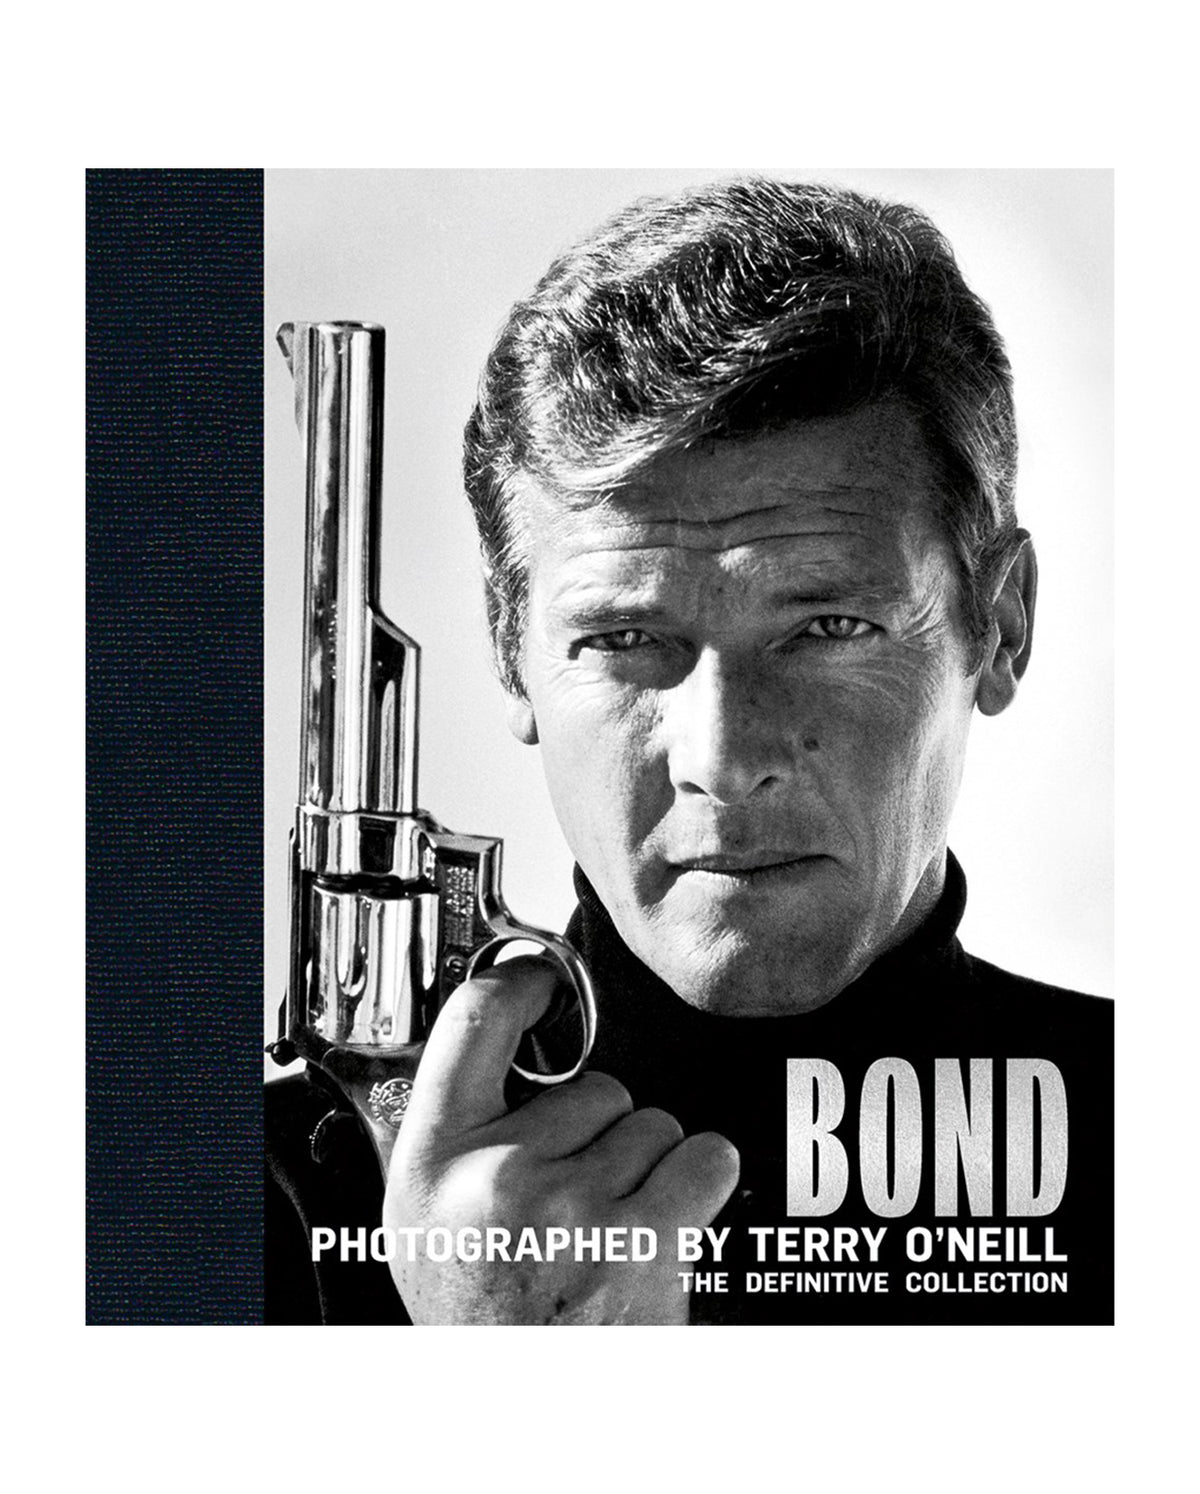 Bond: Photographed By Terry O'neill